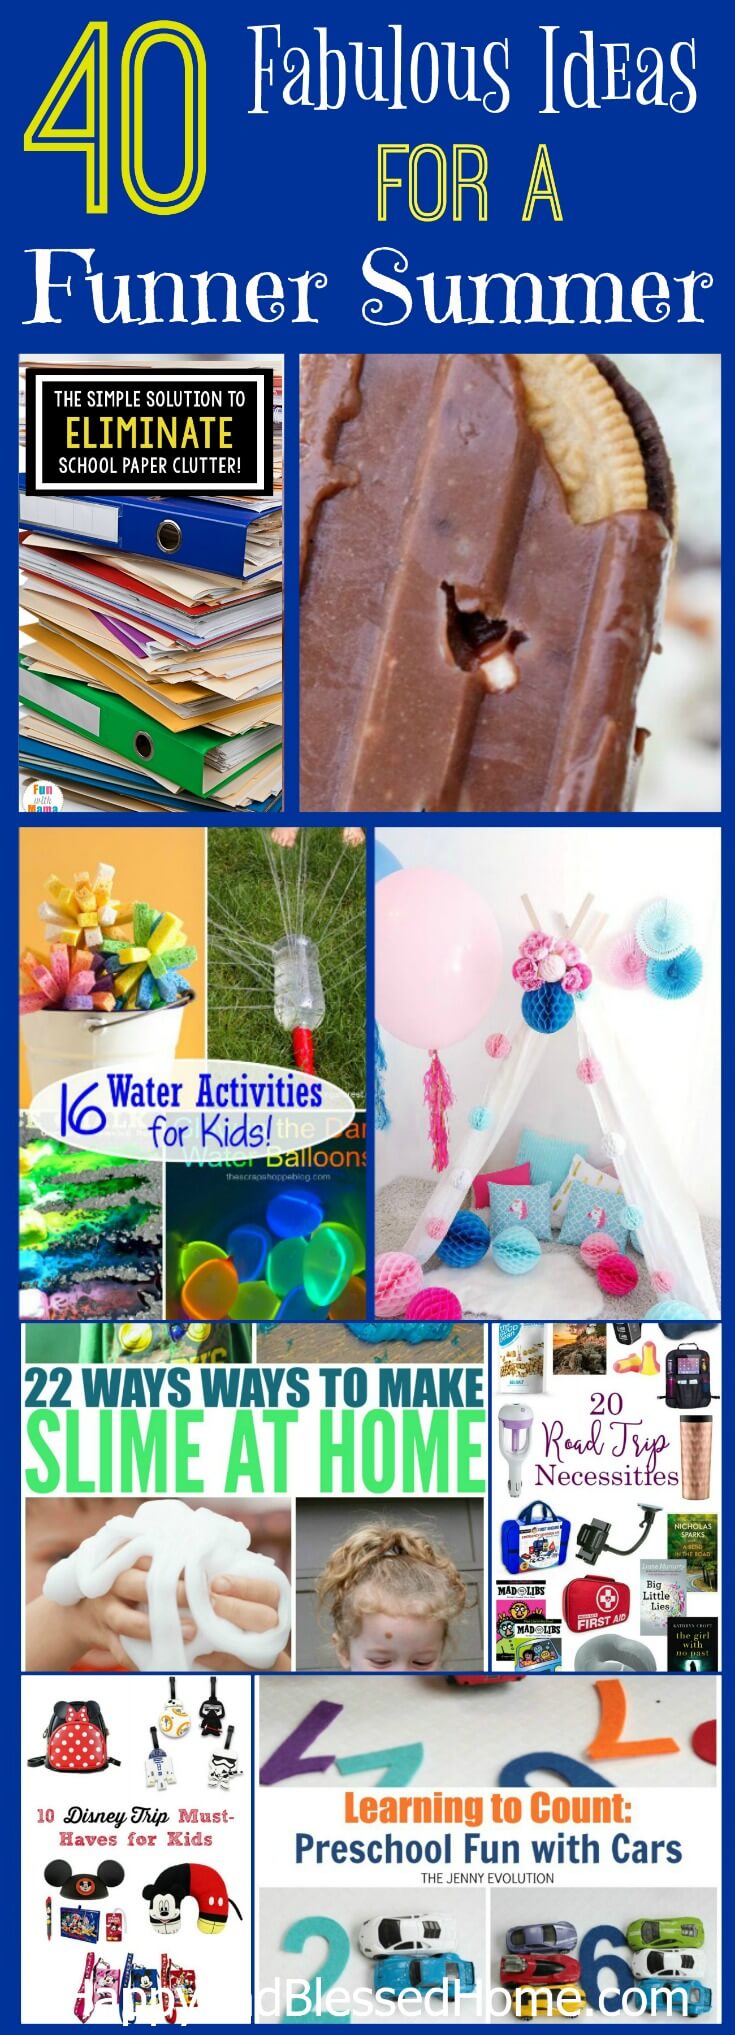 40 Fabulous Ideas for a Funner Summer - Family Fun activities to last all summer long